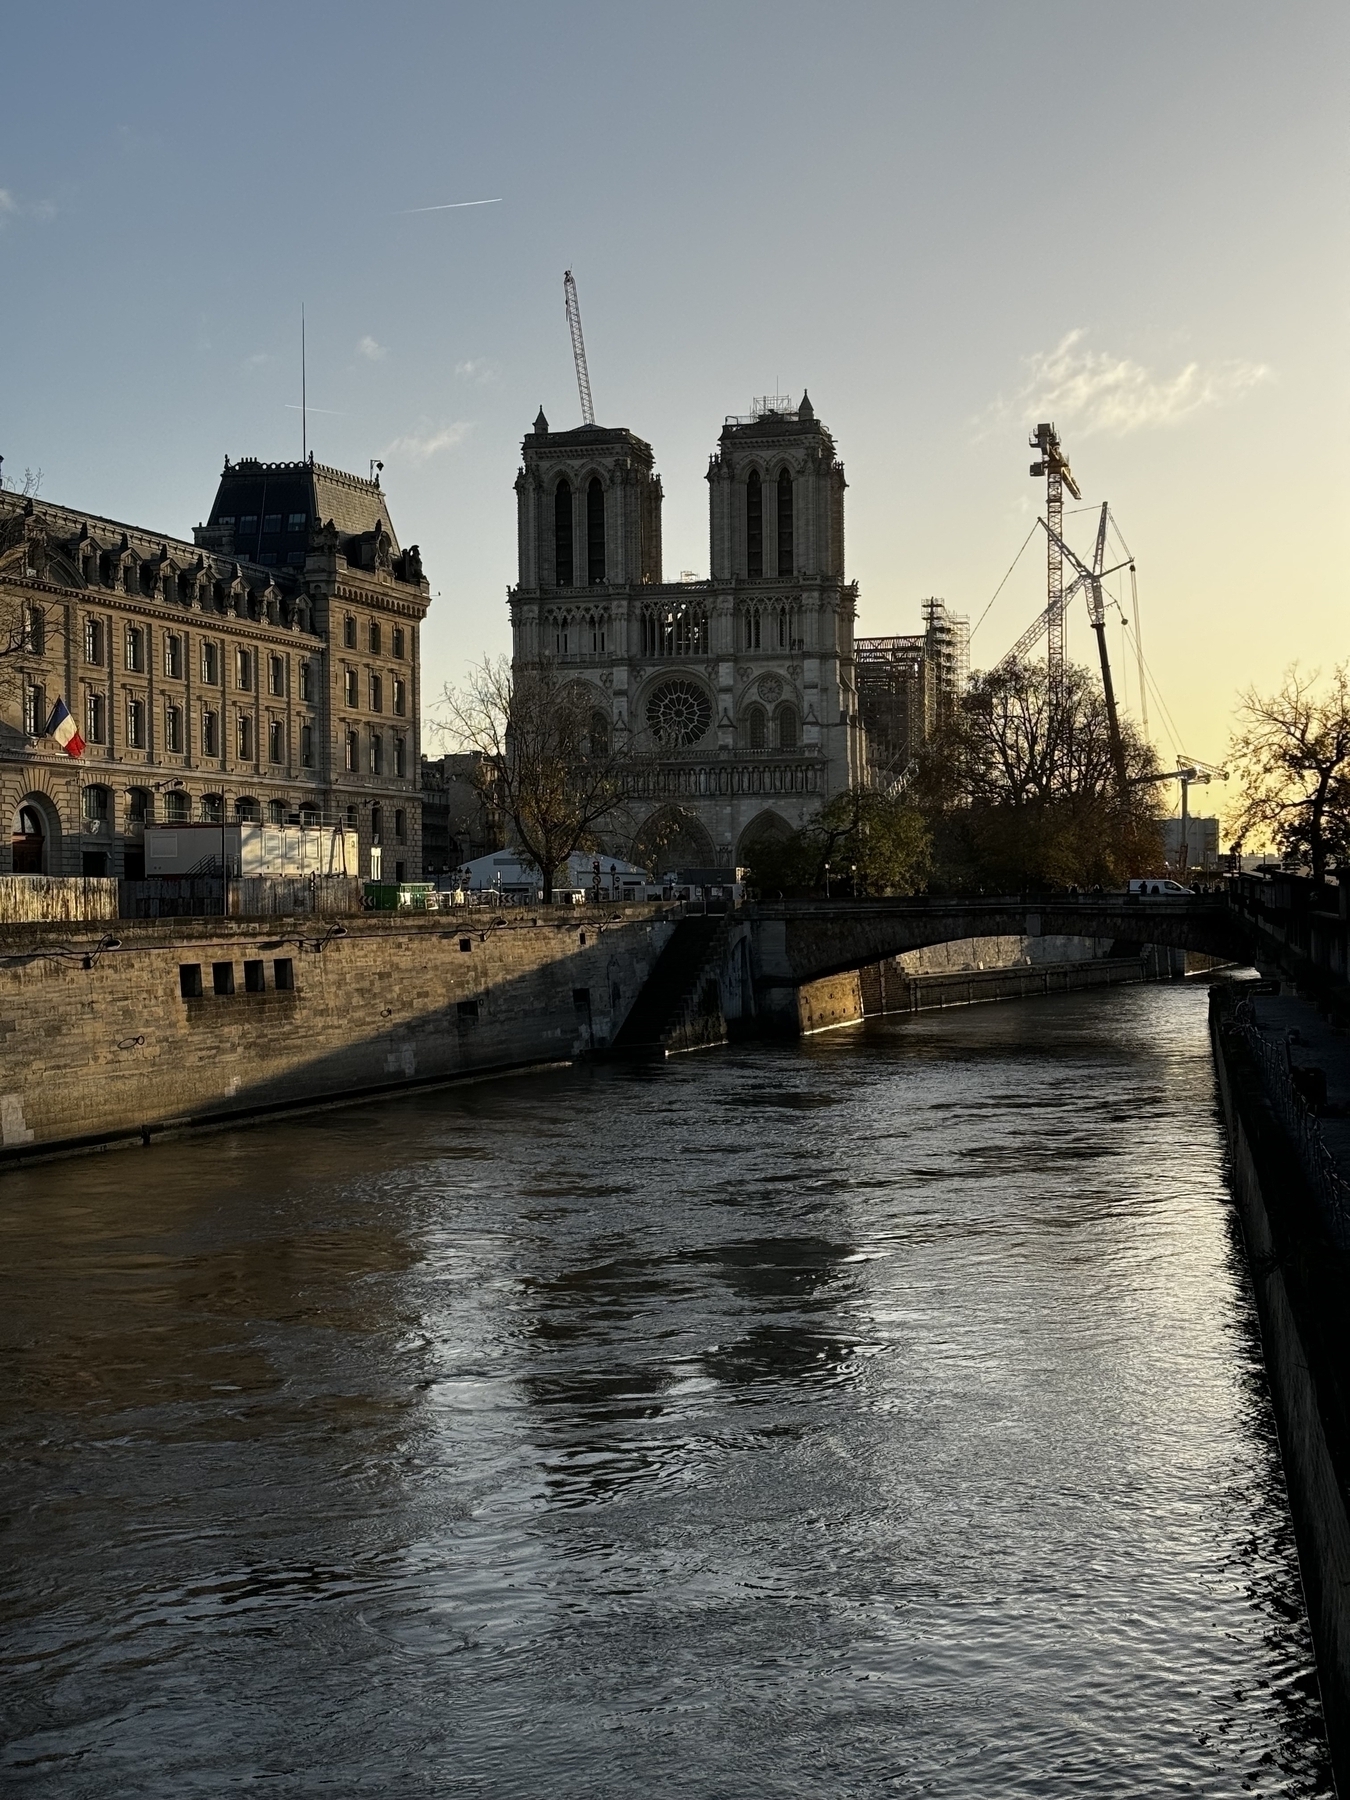 Sun rise over the Seine with the cathedral of Notre Dame on the north bank.